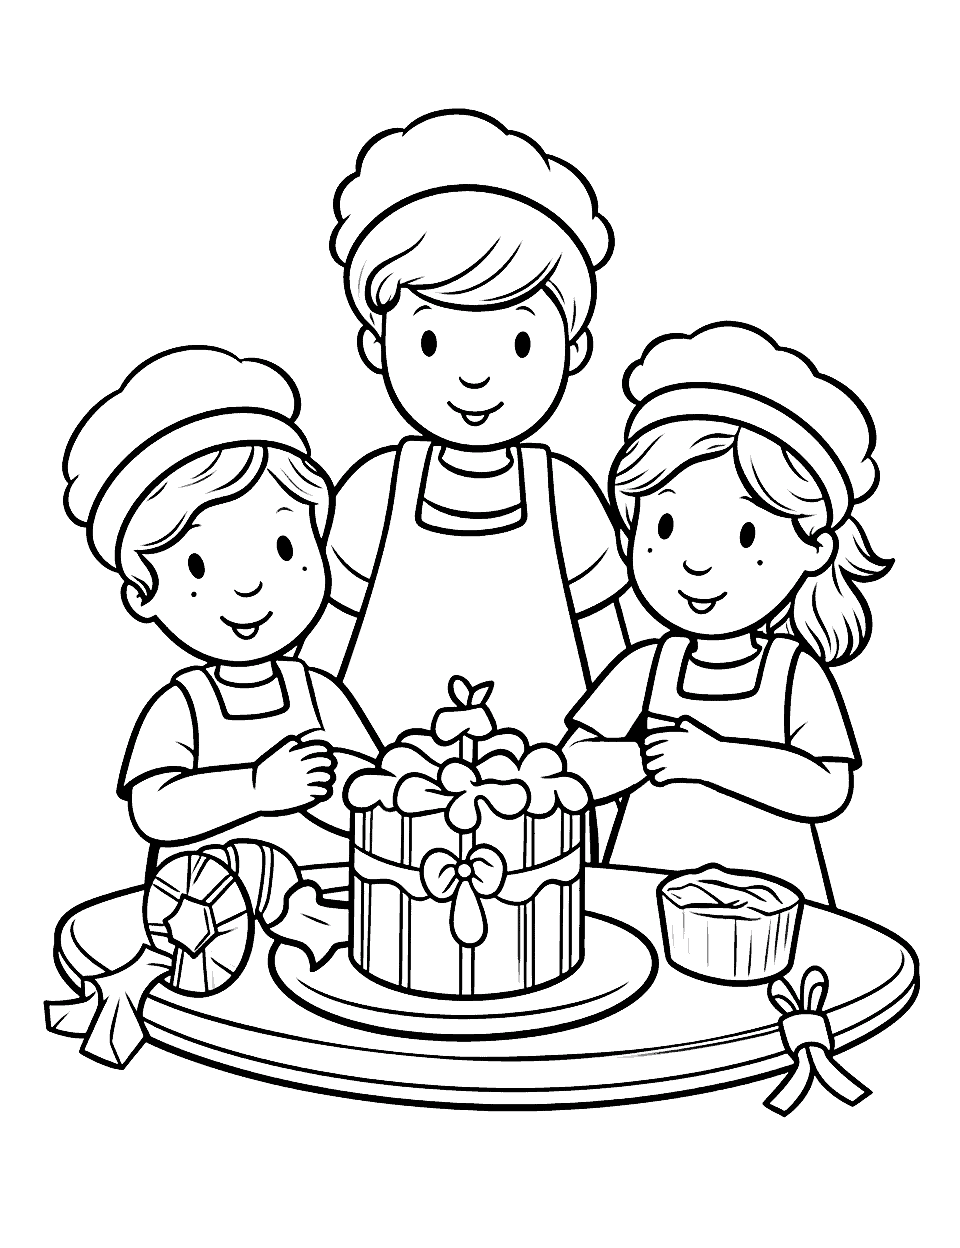 Holiday Baking Christmas Coloring Page - A scene of kids and parents baking holiday cookies and pies.